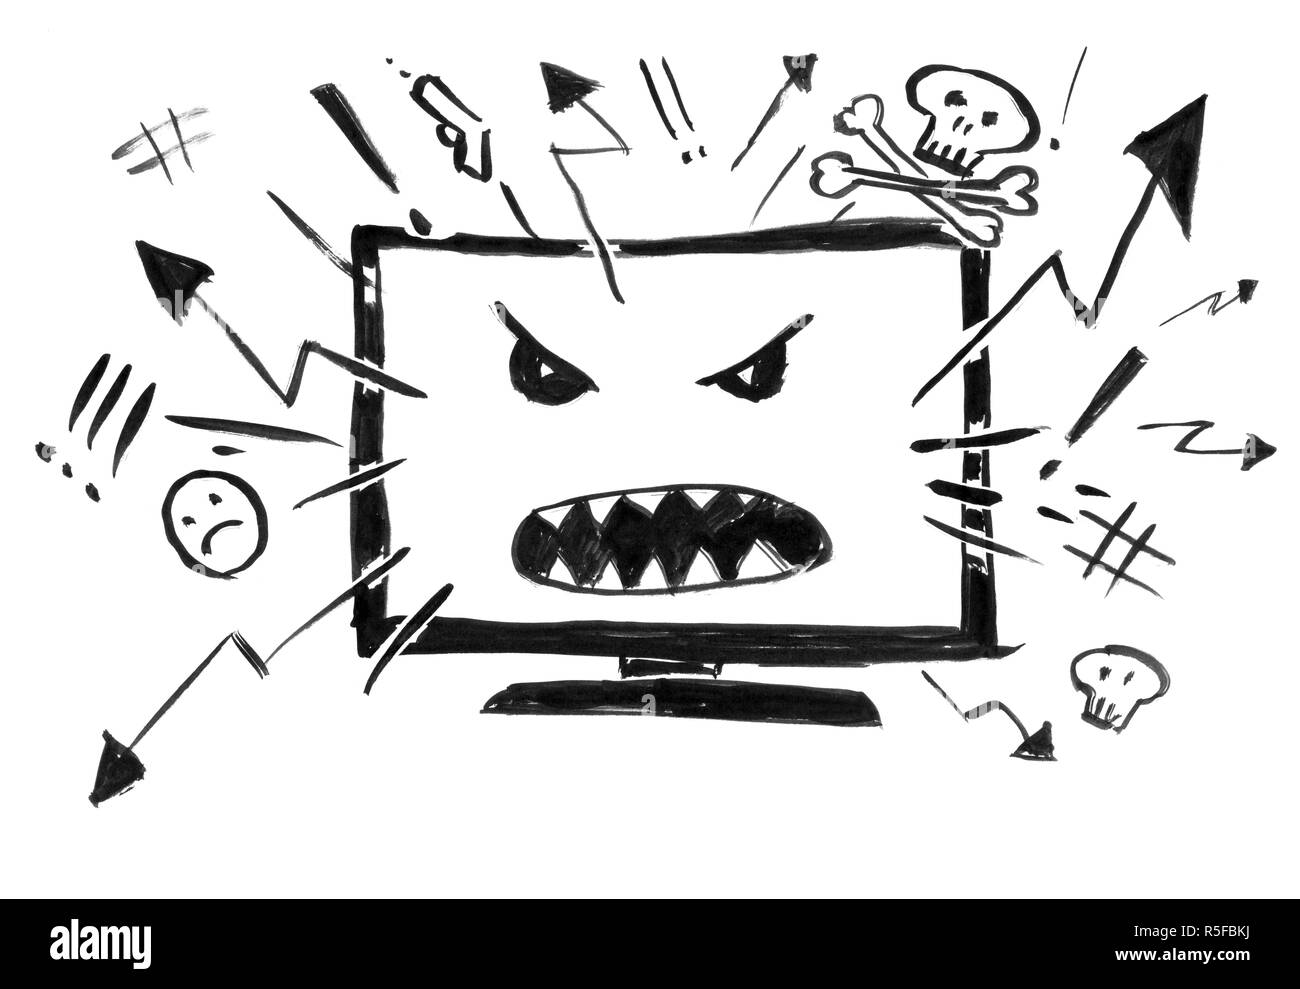 Black Ink Grunge Hand Drawing of Cartoon Television or Internet Showing Only Violence and Hatred Stock Photo